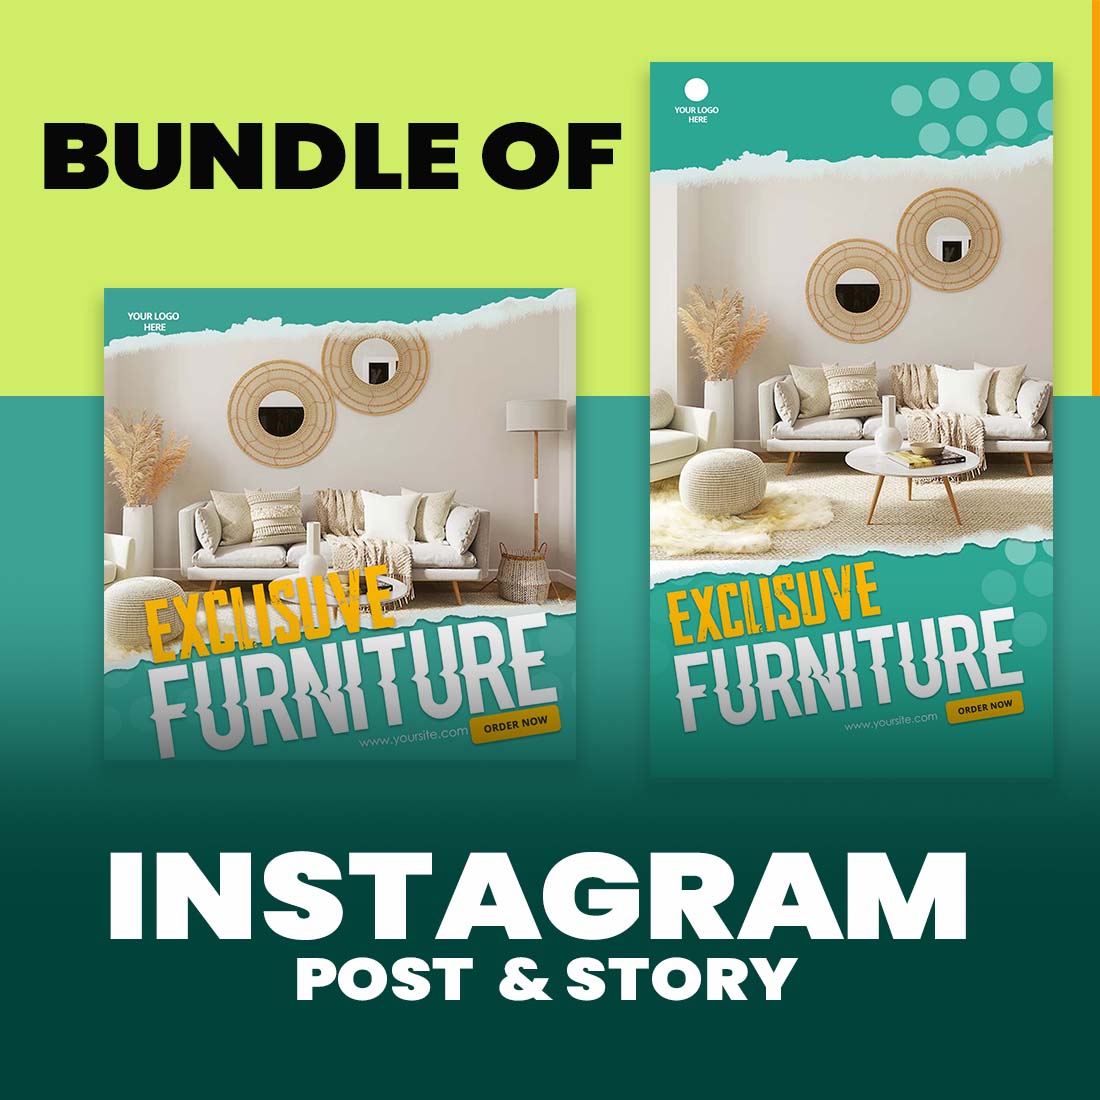 Exclusive Furniture Instagram Post and Story Templates cover image.